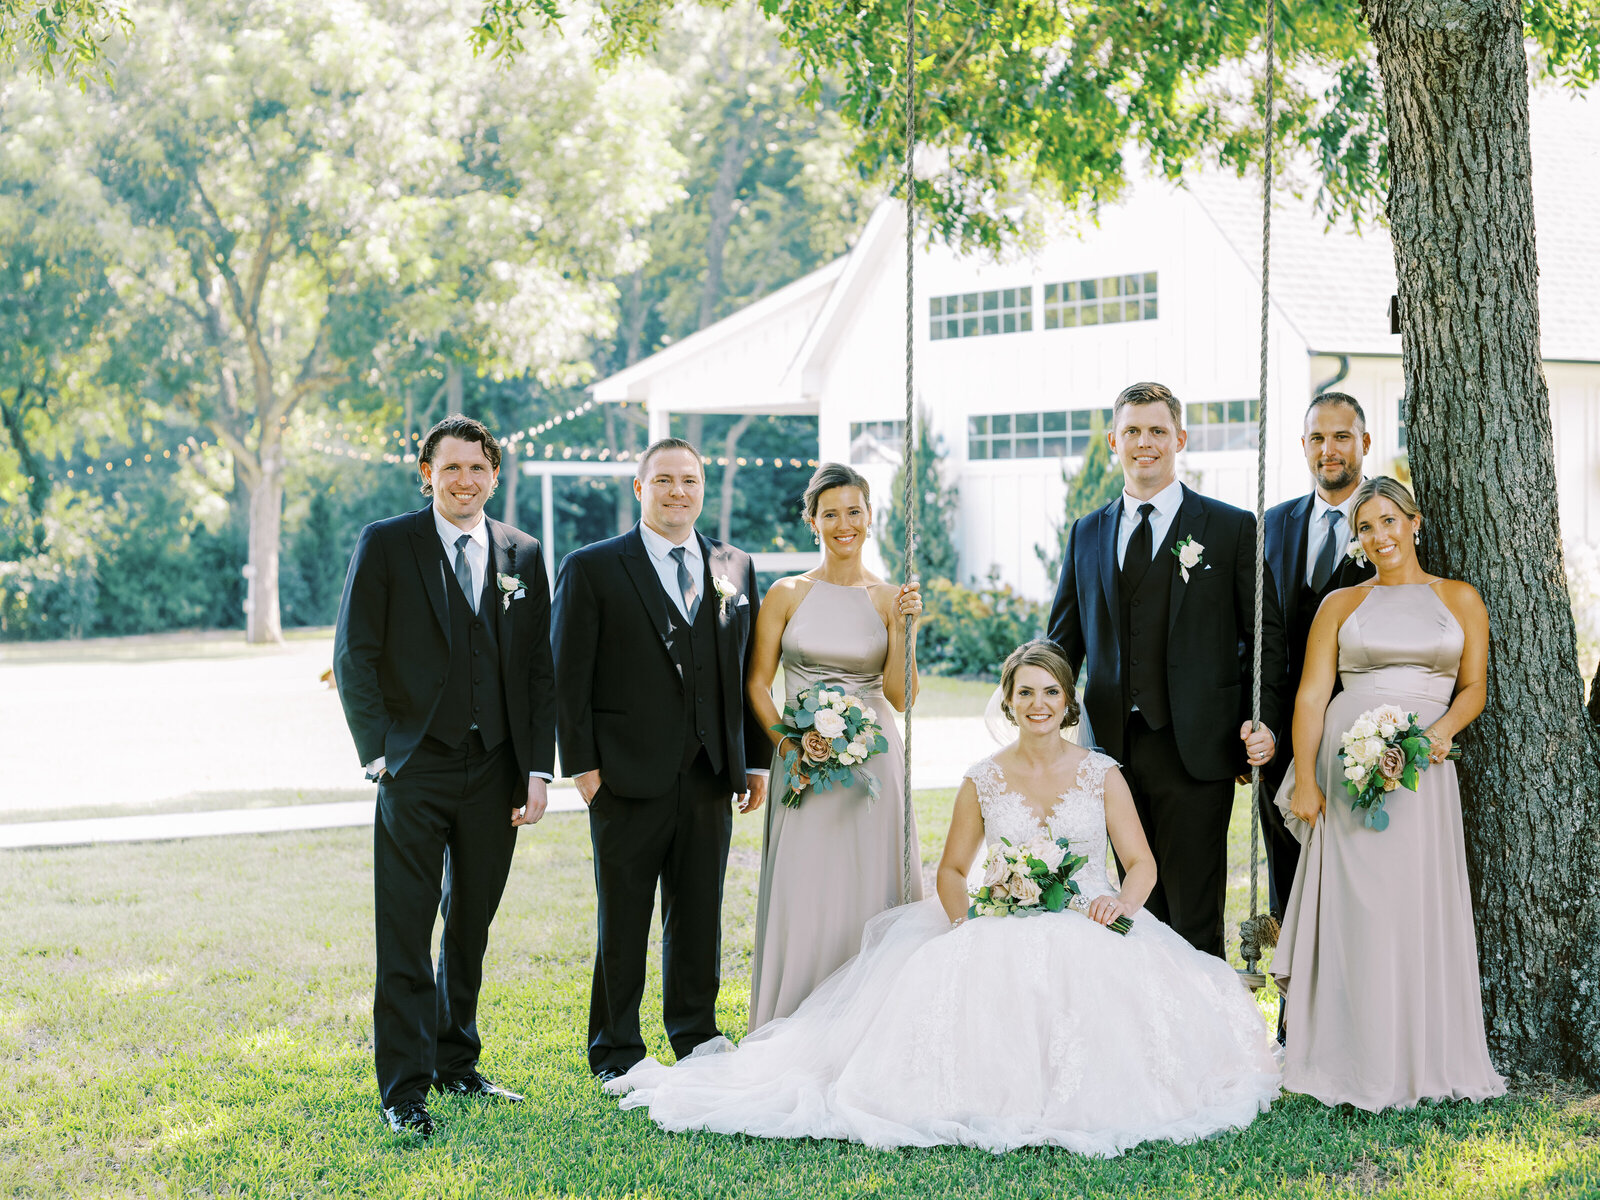 cathedral-wedding-jen-symes-38